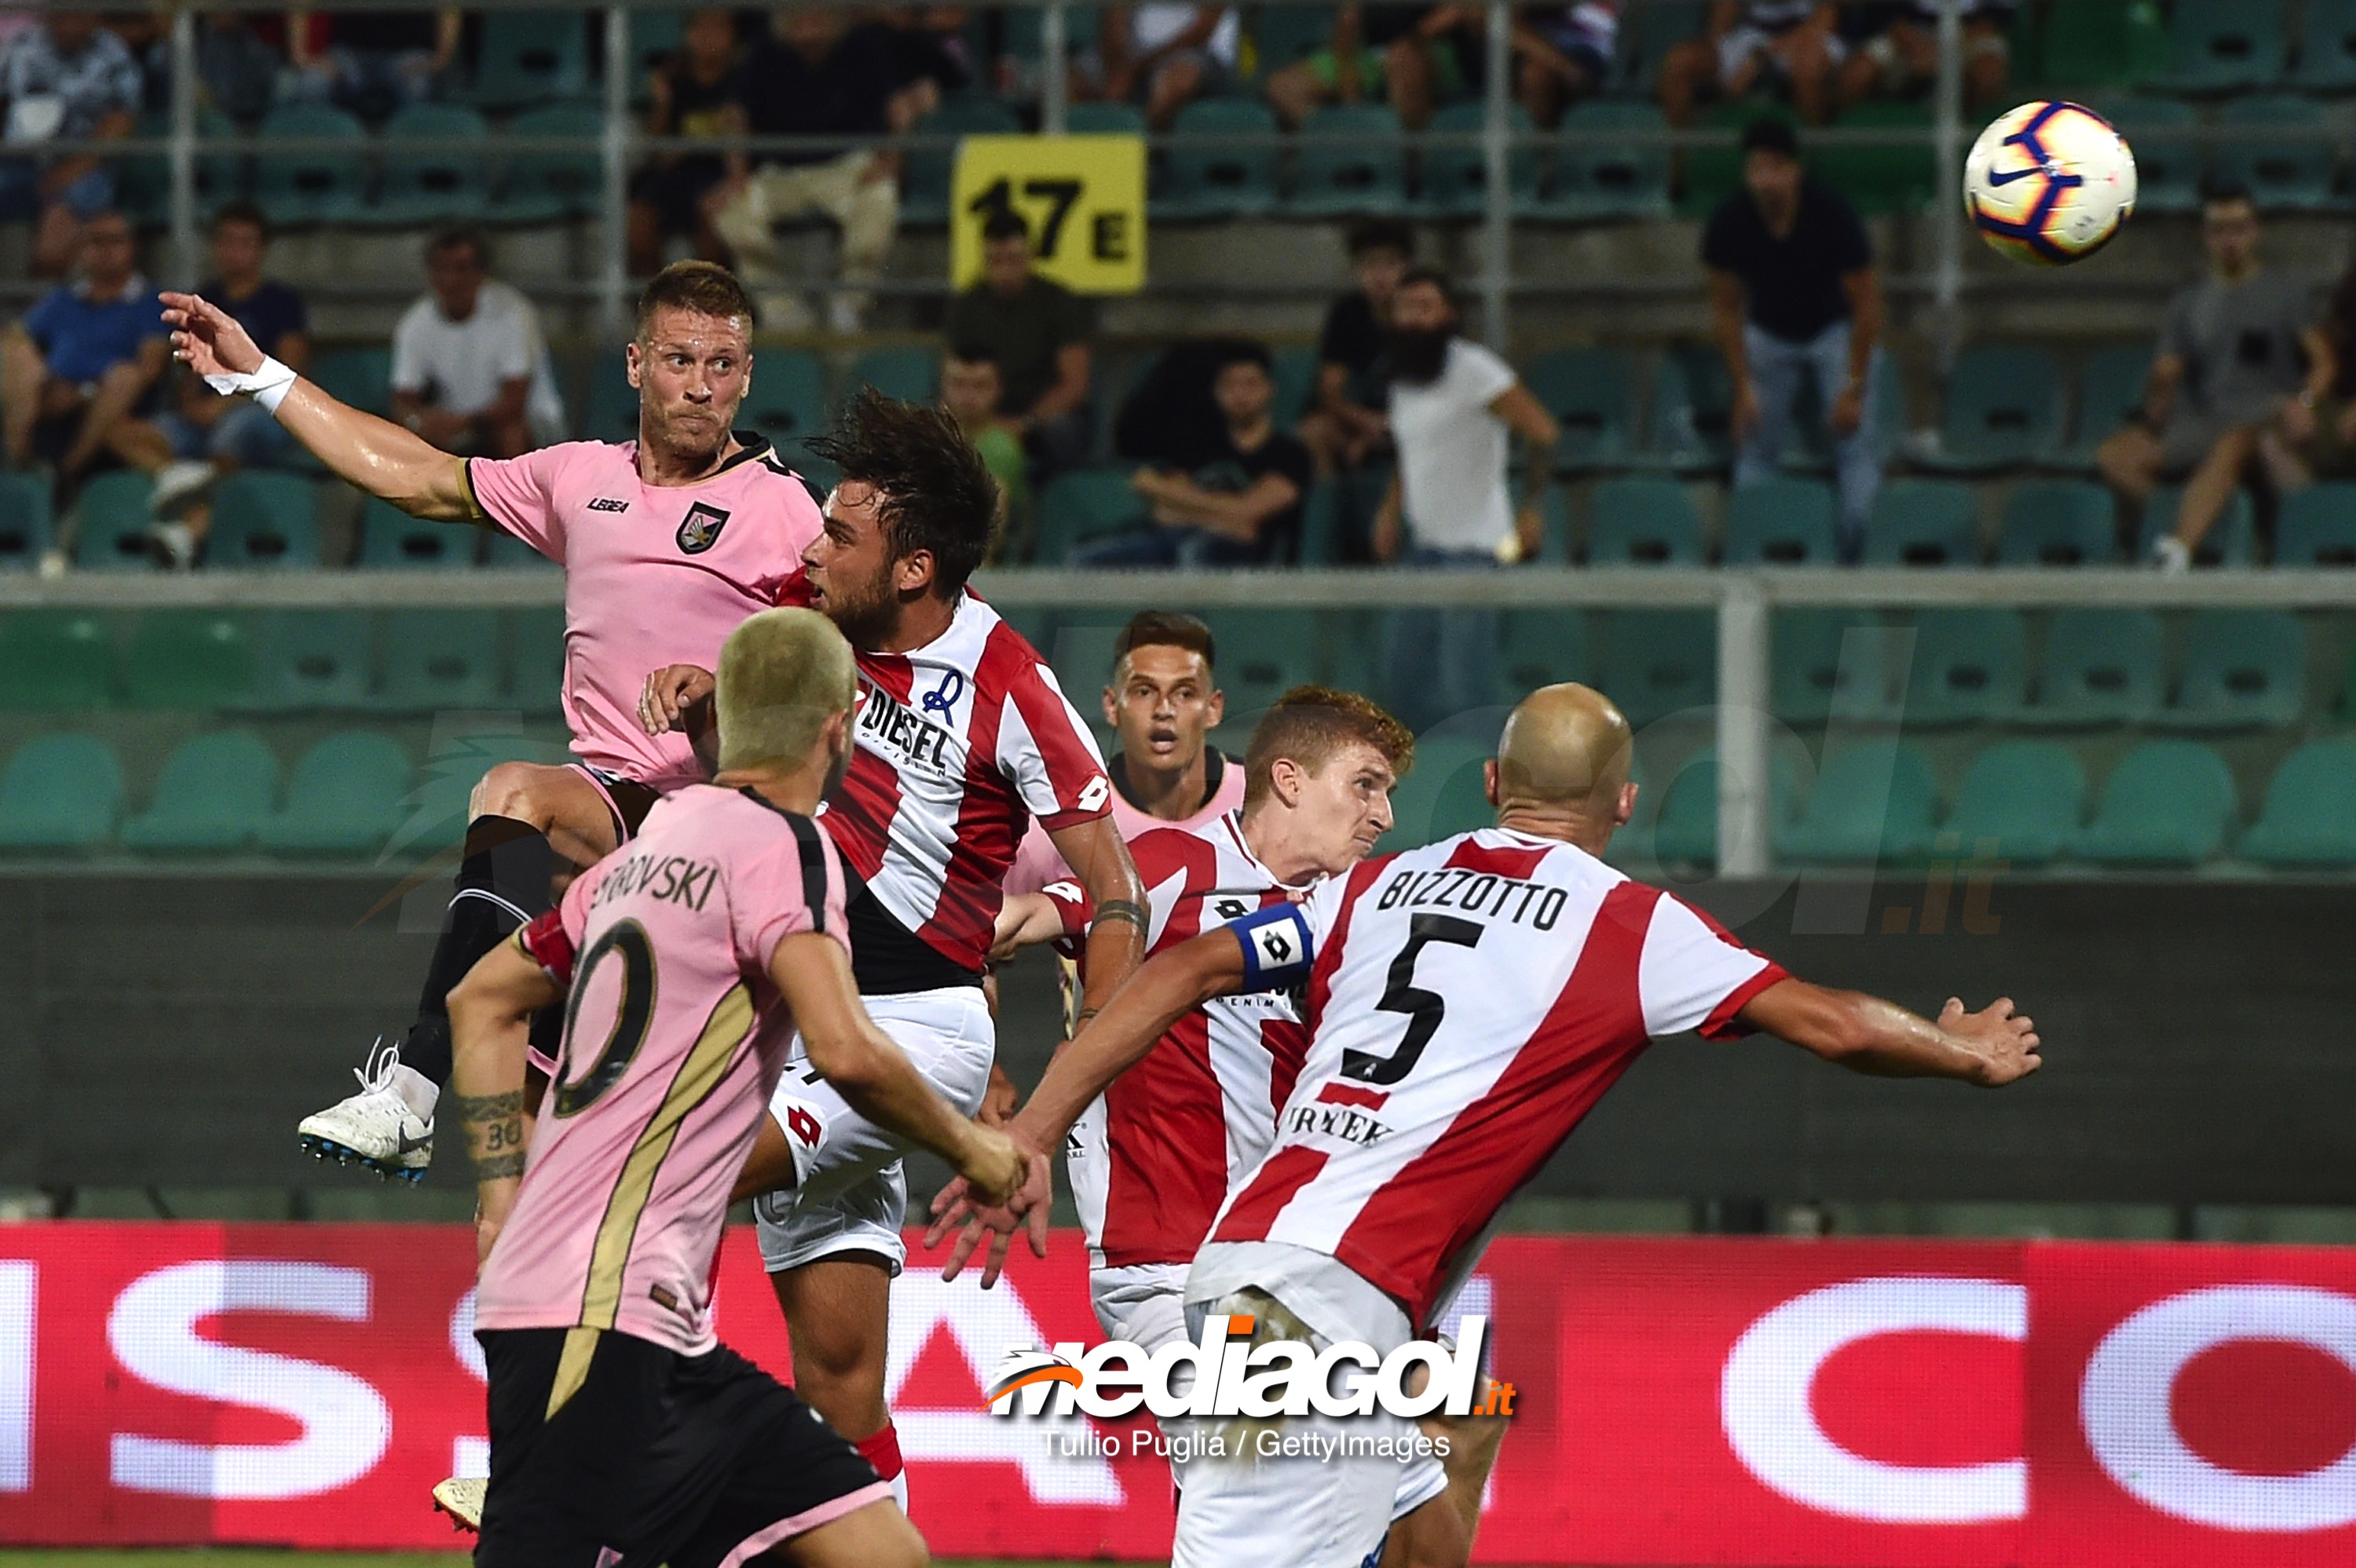 PALERMO, ITALY - AUGUST 05:  Slobodan Rajkovic of Palermo scores the second equalizing goal during the TIM Cup match between US Citta' di Palermo and Vicenza Calcio at Stadio Renzo Barbera on August 5, 2018 in Palermo, Italy.  (Photo by Tullio M. Puglia/Getty Images)